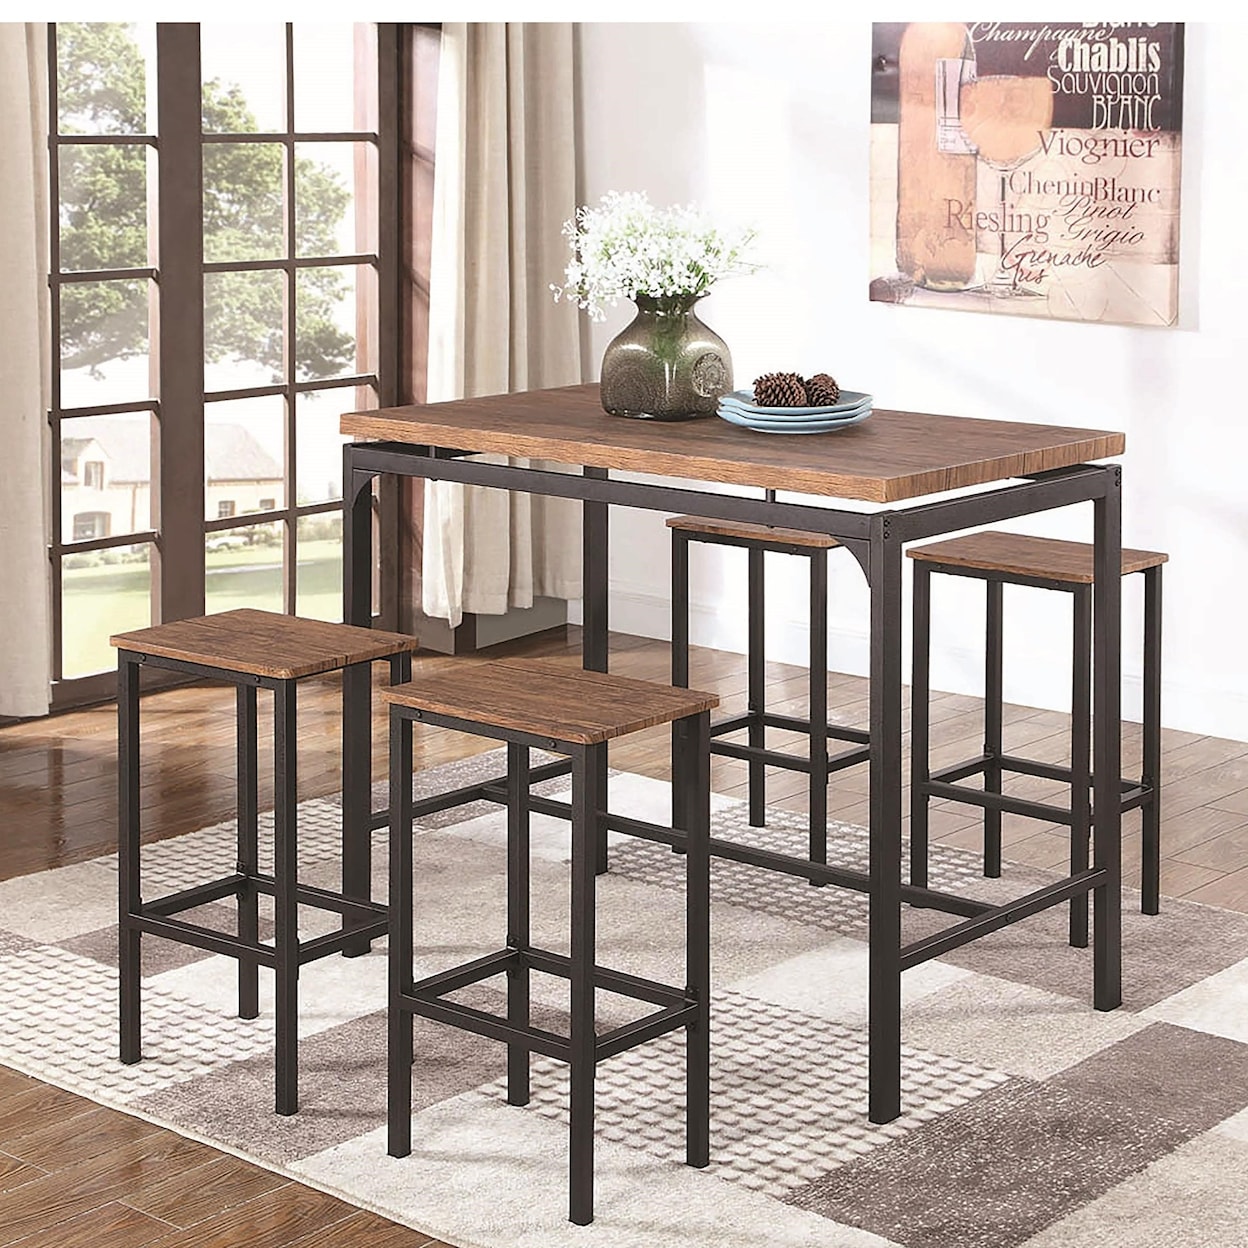 Coaster 182002 5pc Dining Room Group